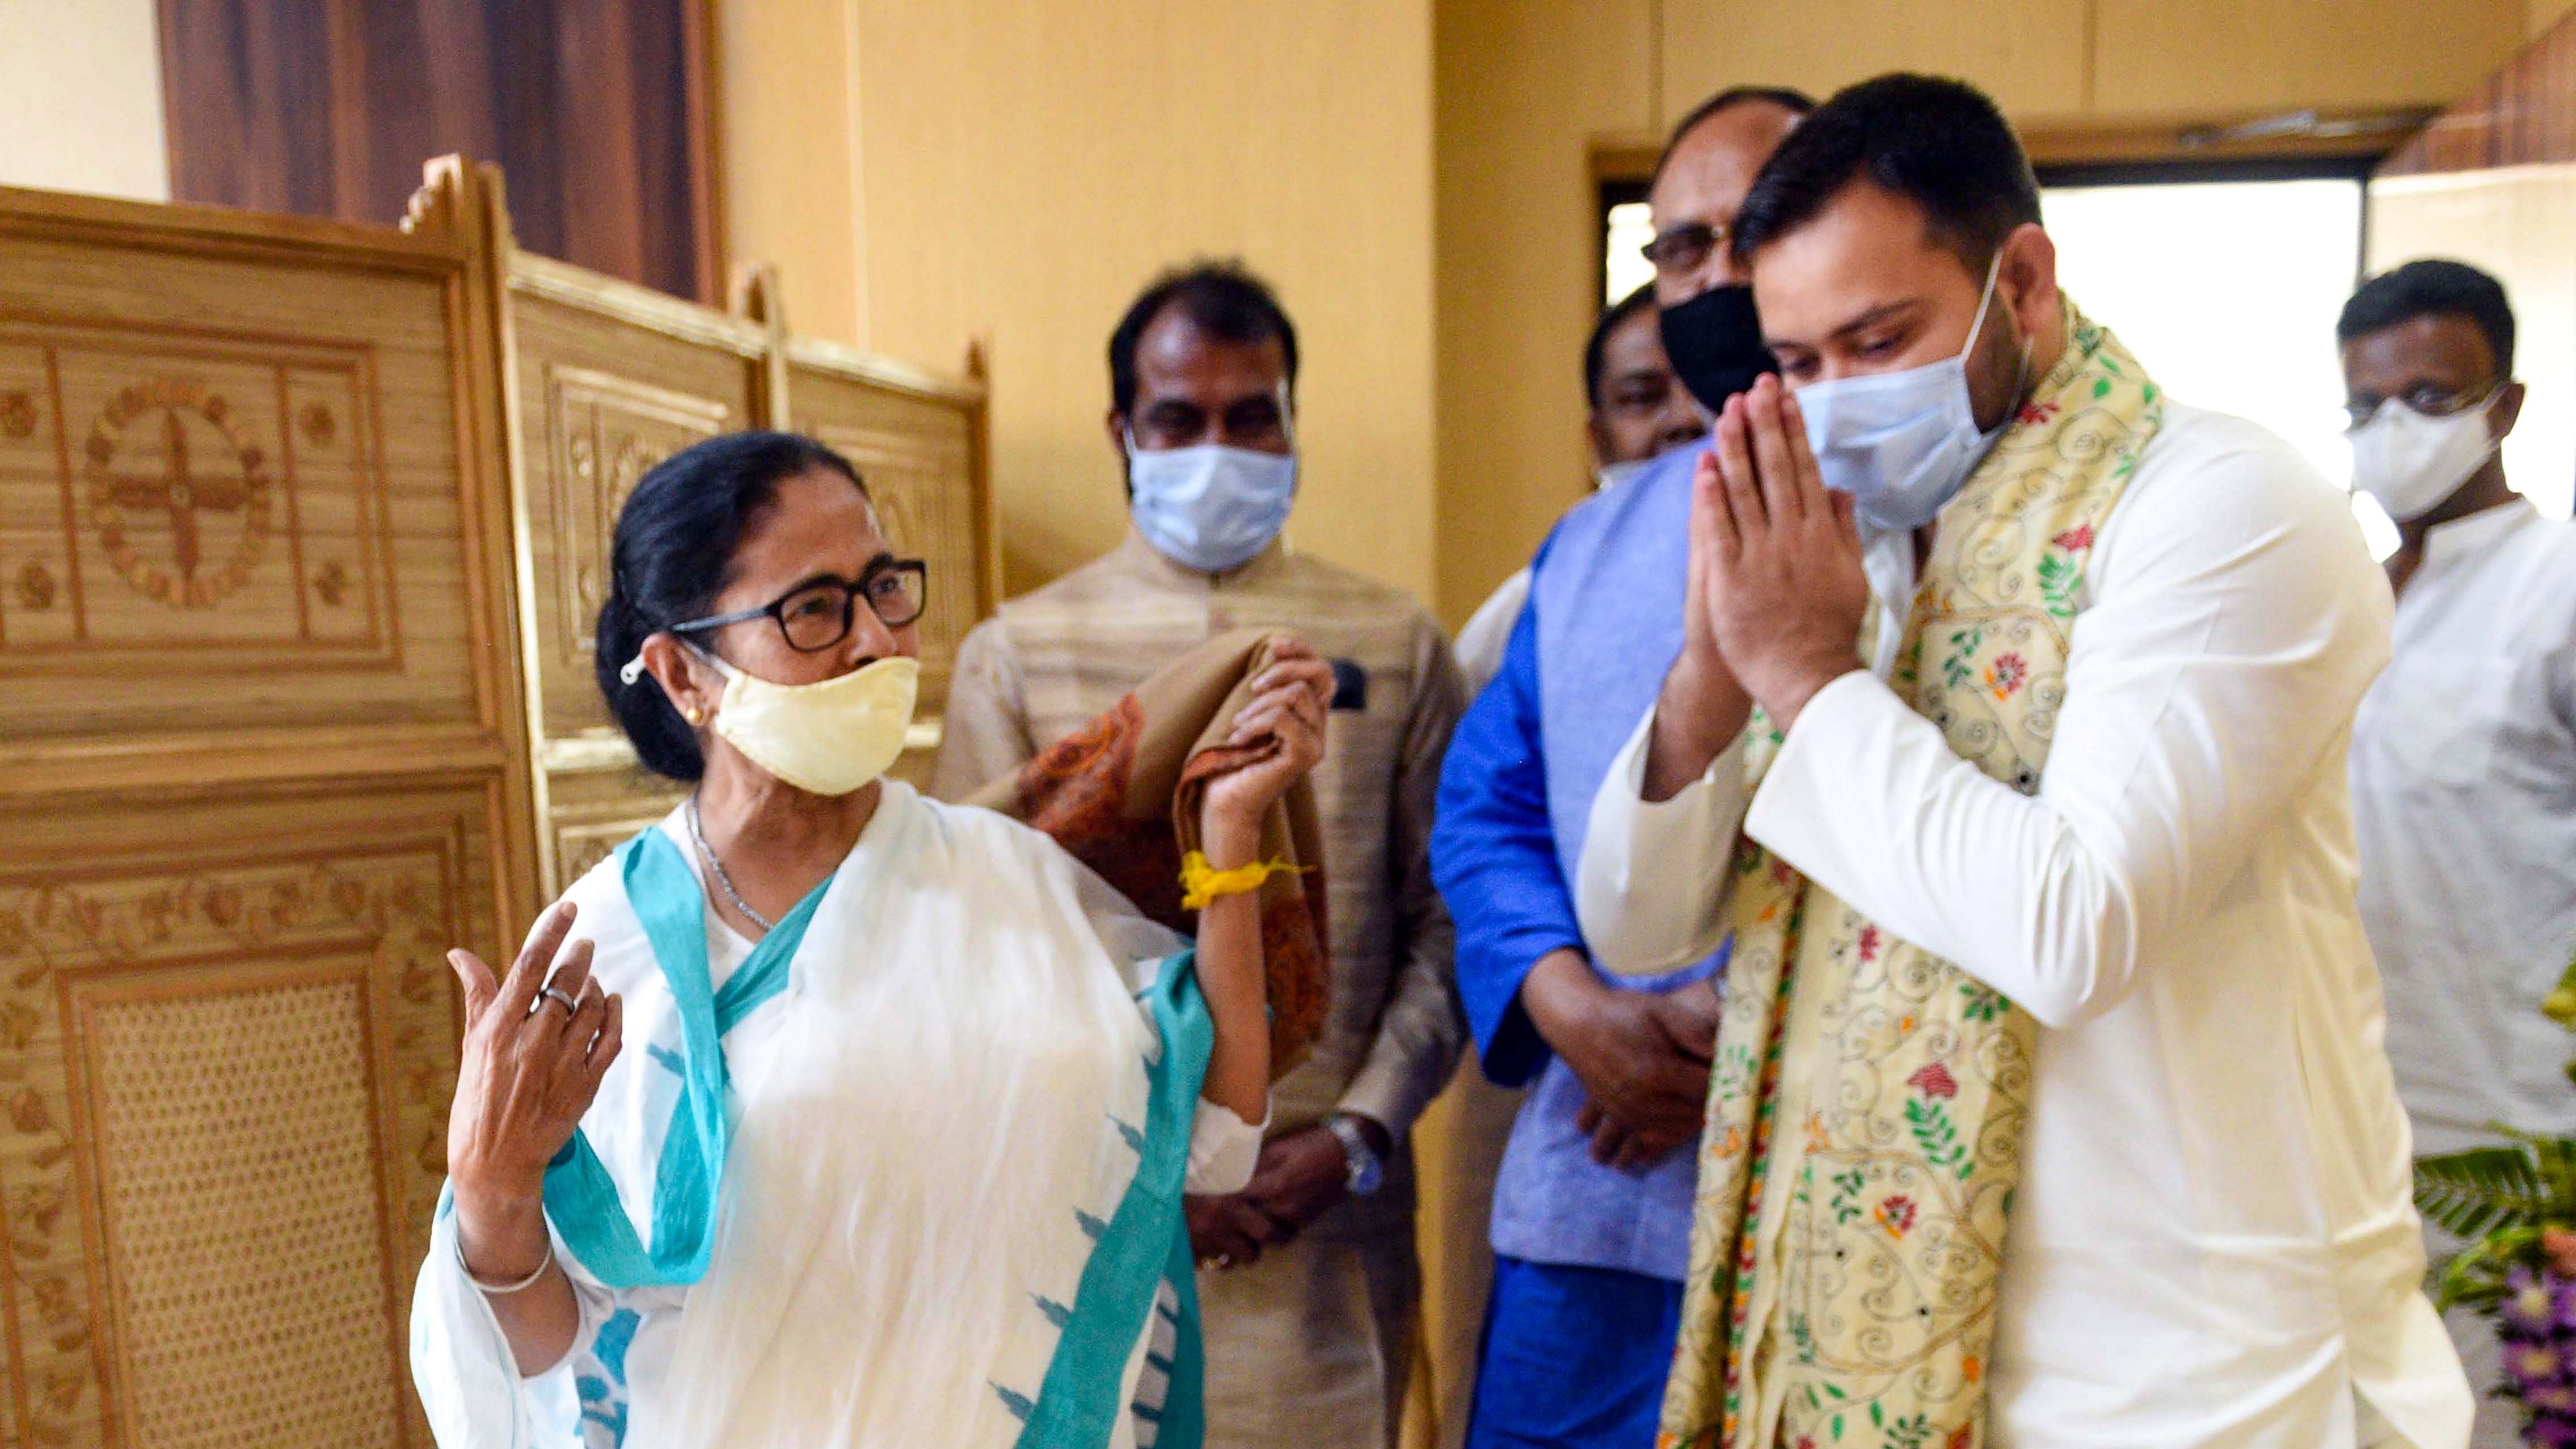 On Friday, Maharasthra’s Shiv Sena became the third regional party to announce support to TMC, stating it will not contest the West Bengal polls. Before it, Rashtriya Janata Dal from Bihar and Samajwadi Party from UP extended their support to Didi, hailing her credentials as an Opposition leader. Image: Tejashwi Yadav is greeted by Mamata Banerjee. Credit: PTI Photo